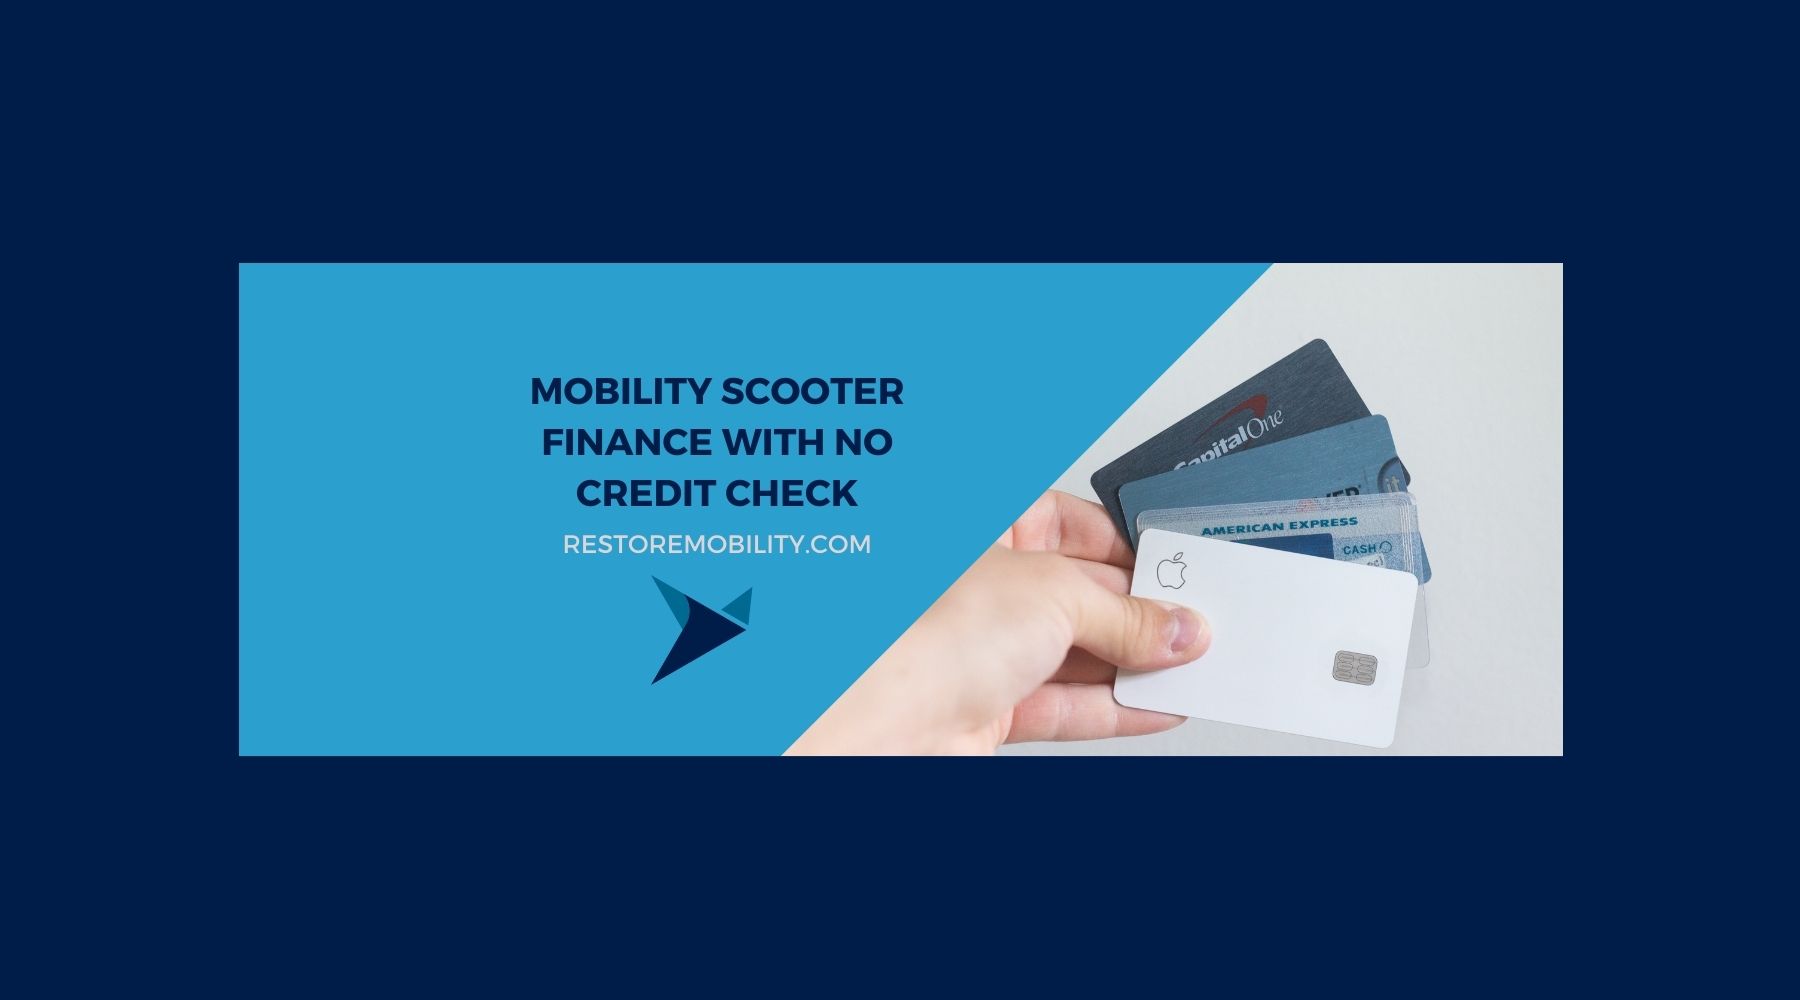 Mobility Scooter Finance with No Credit Check